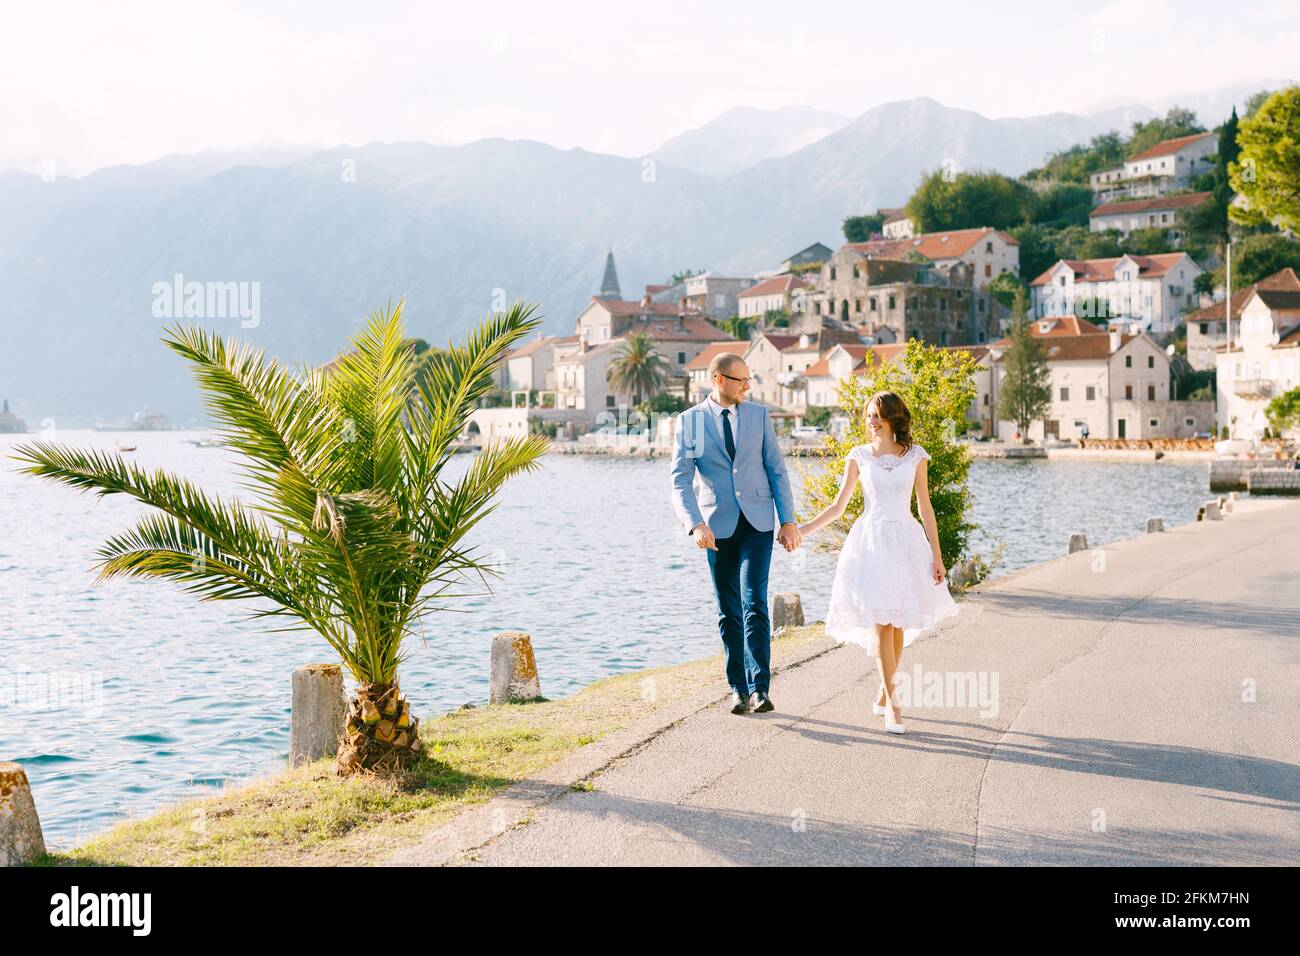 Smiling bride and groom walk along the road holding hands against the background of buildings of the city of Perast in Montenegro Stock Photo